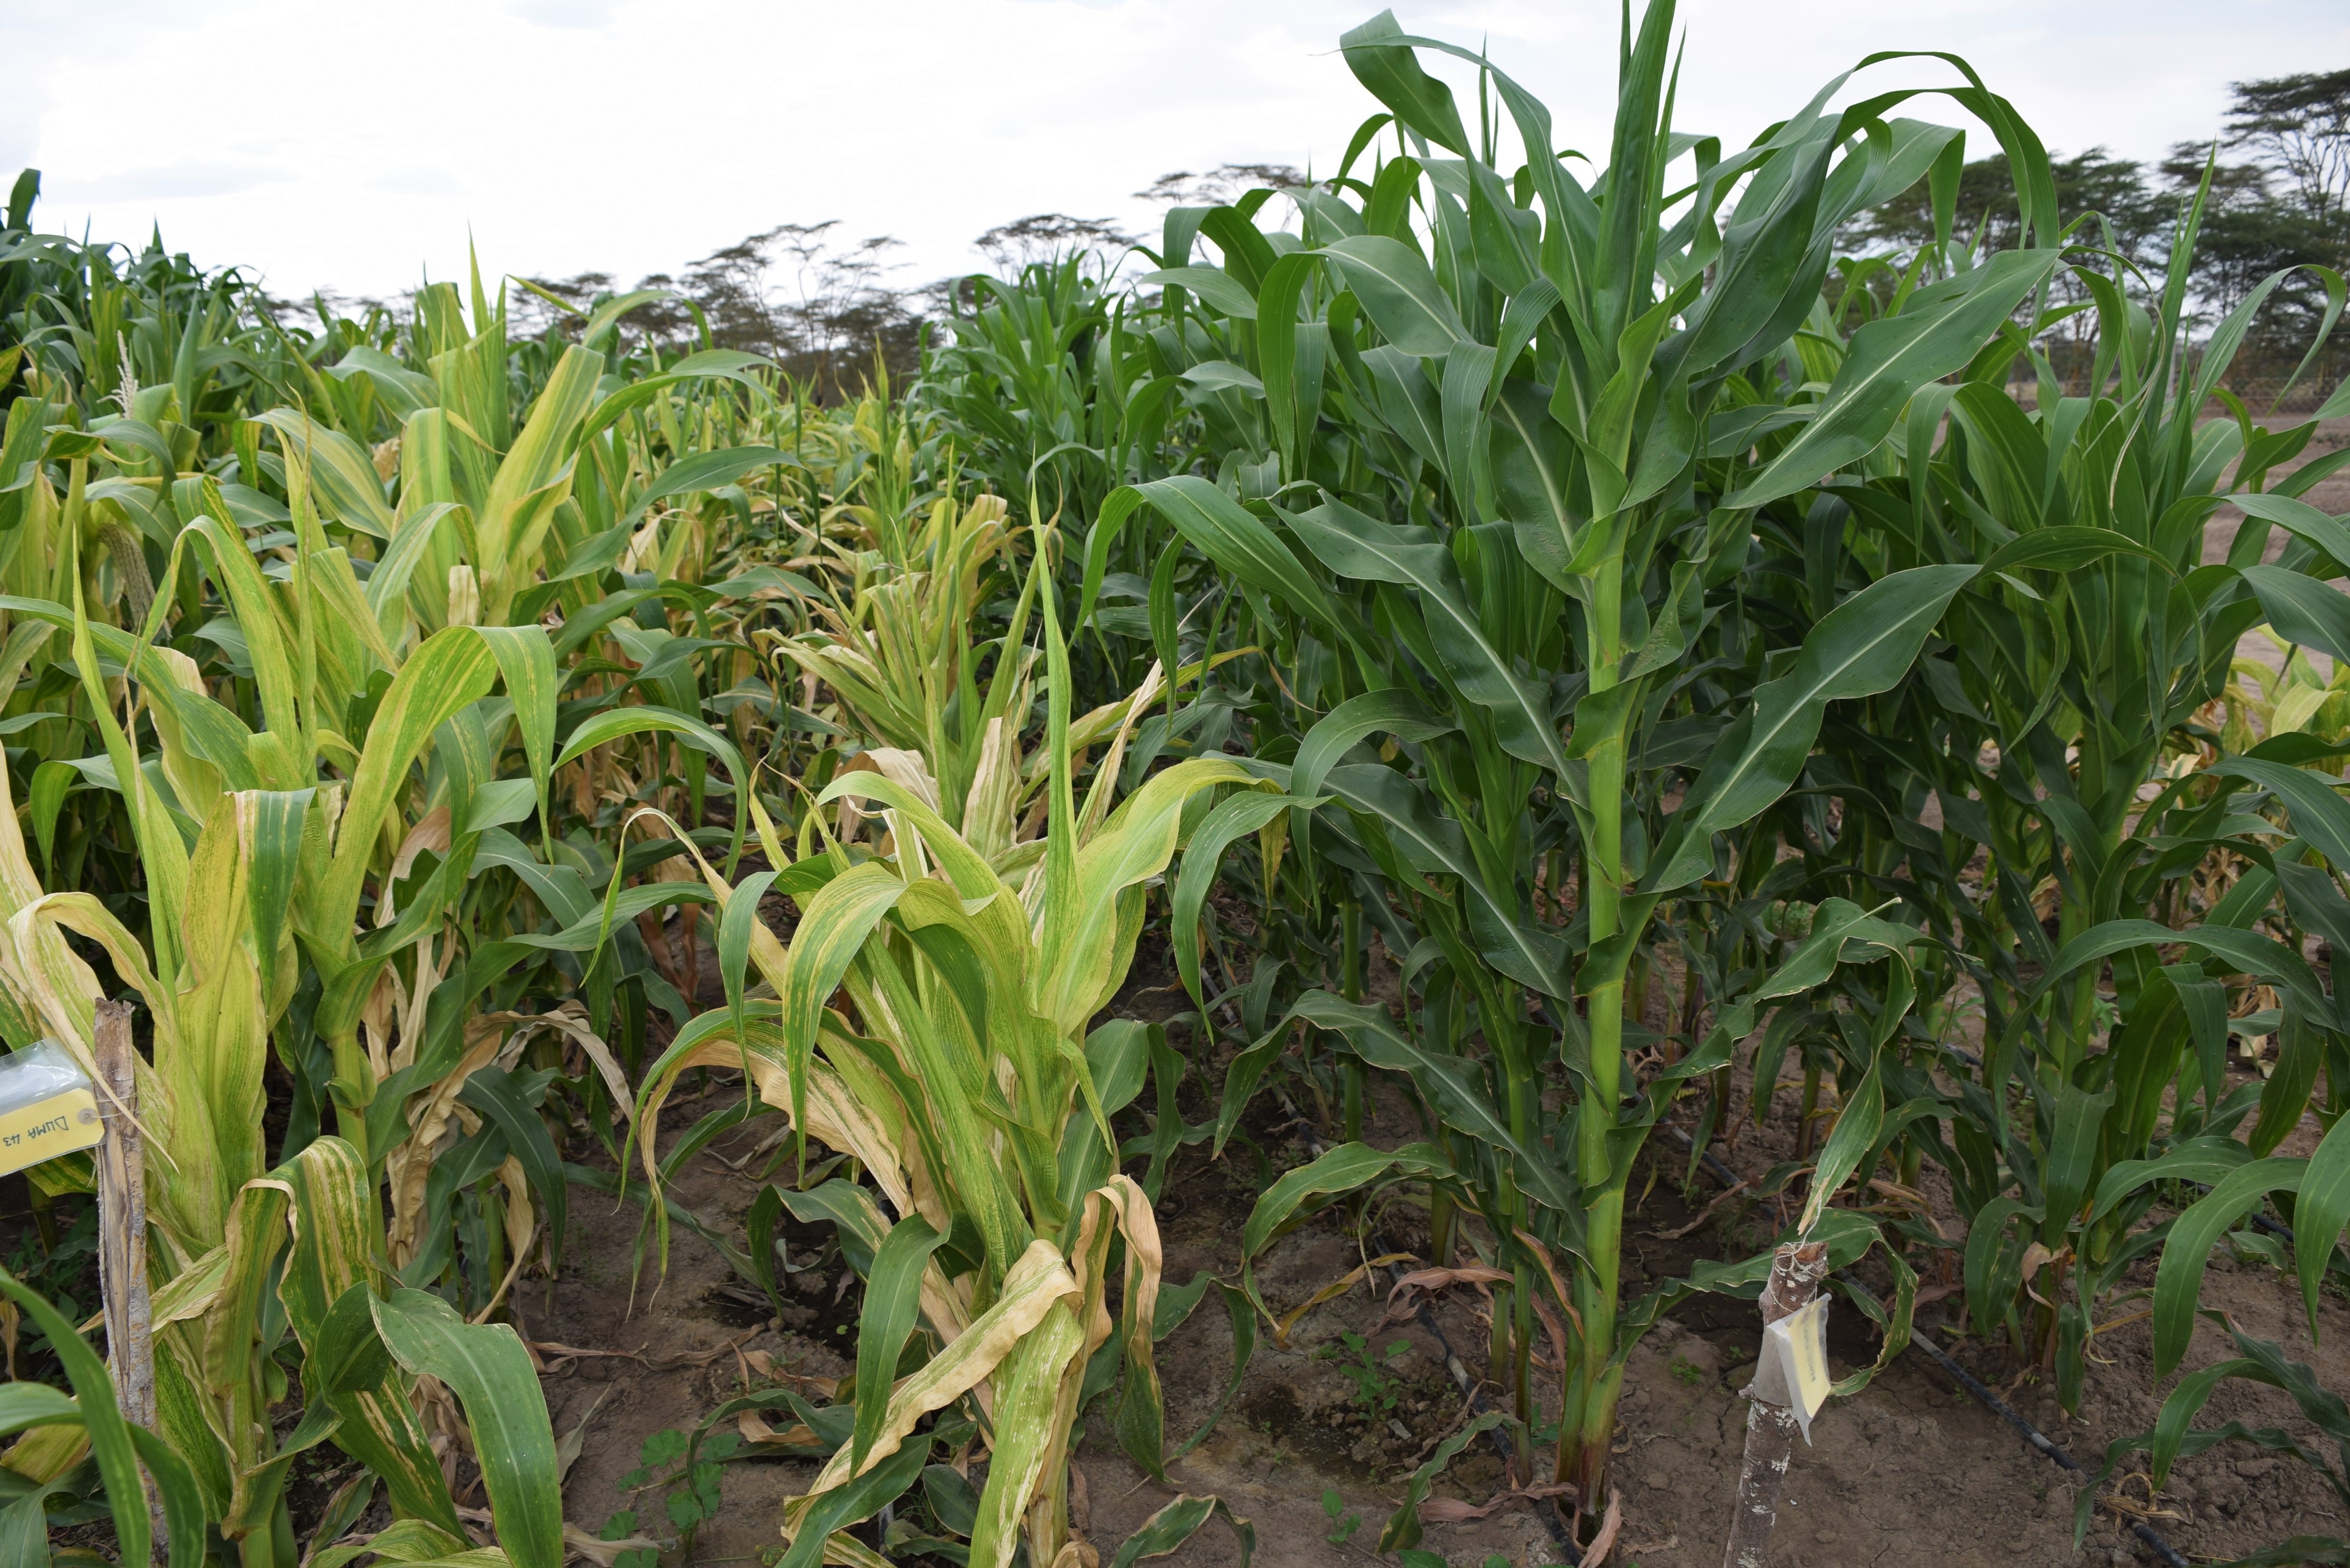 Resistant hybrid (on the right) grows beside a susceptible commercial check at the Kenya Plant Health Inspectorate Services' (KEPHIS) National Performance Trial. (Photo: CIMMYT)